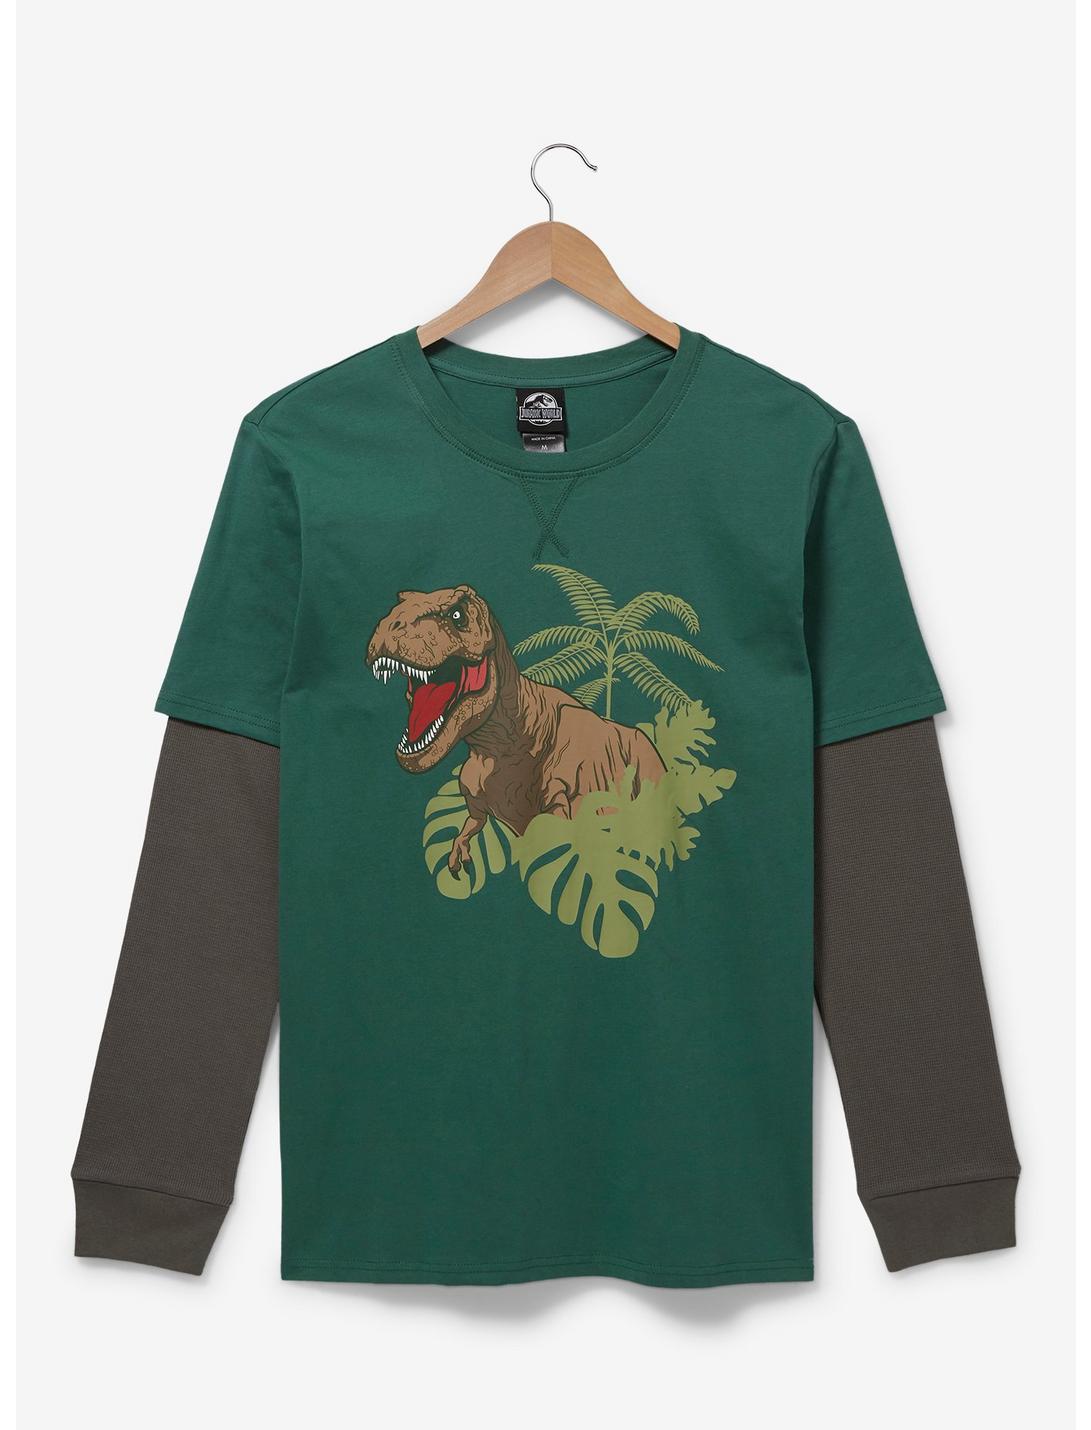 Jurassic Park T-Rex Layered Long Sleeve T-Shirt - BoxLunch Exclusive, MULTI, hi-res